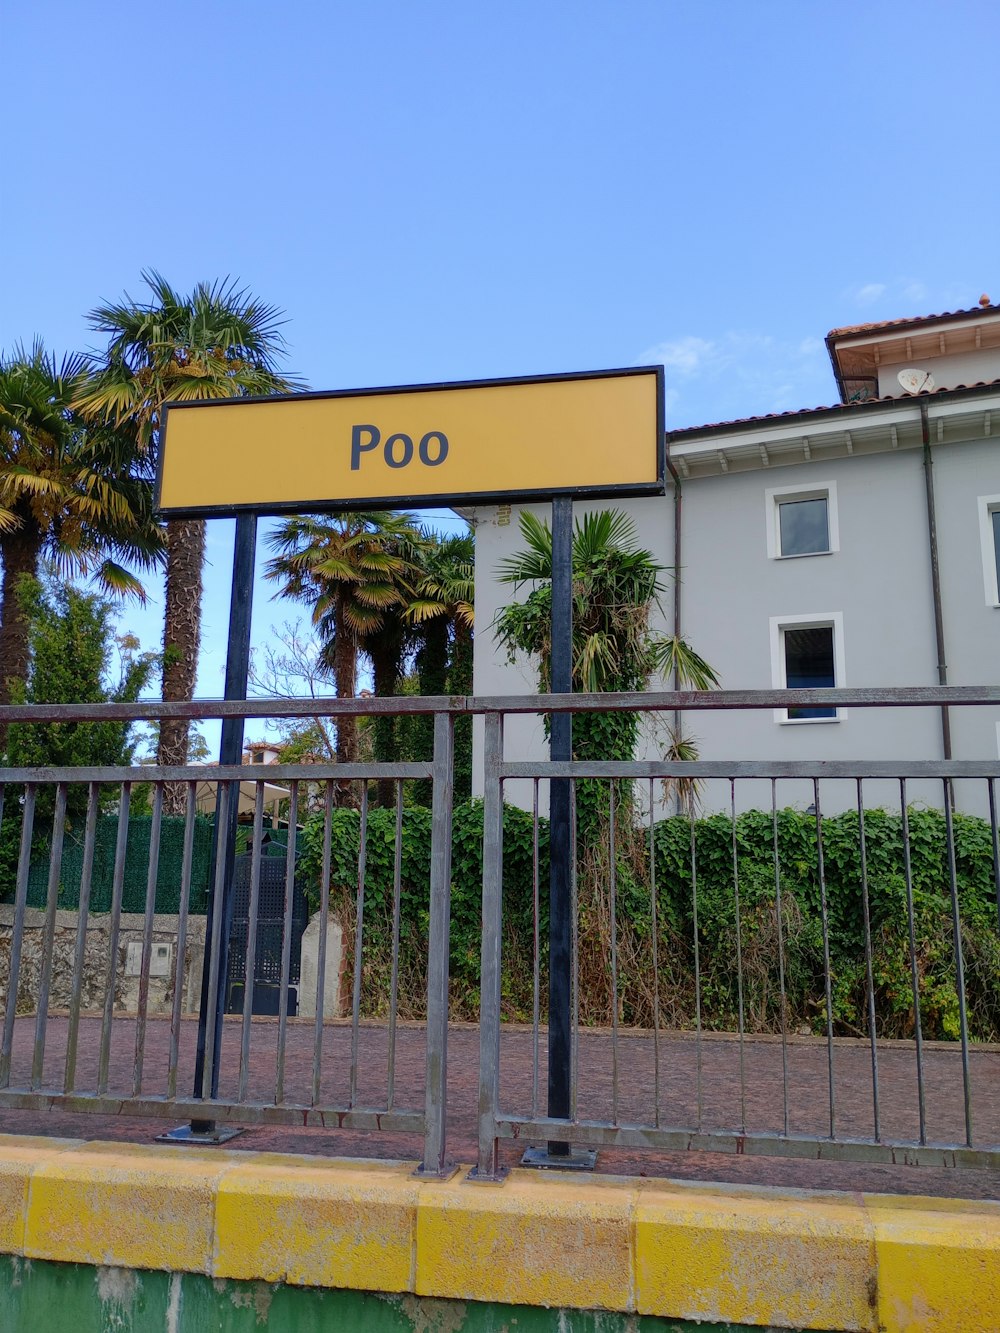 a fenced in area with a sign that says poo